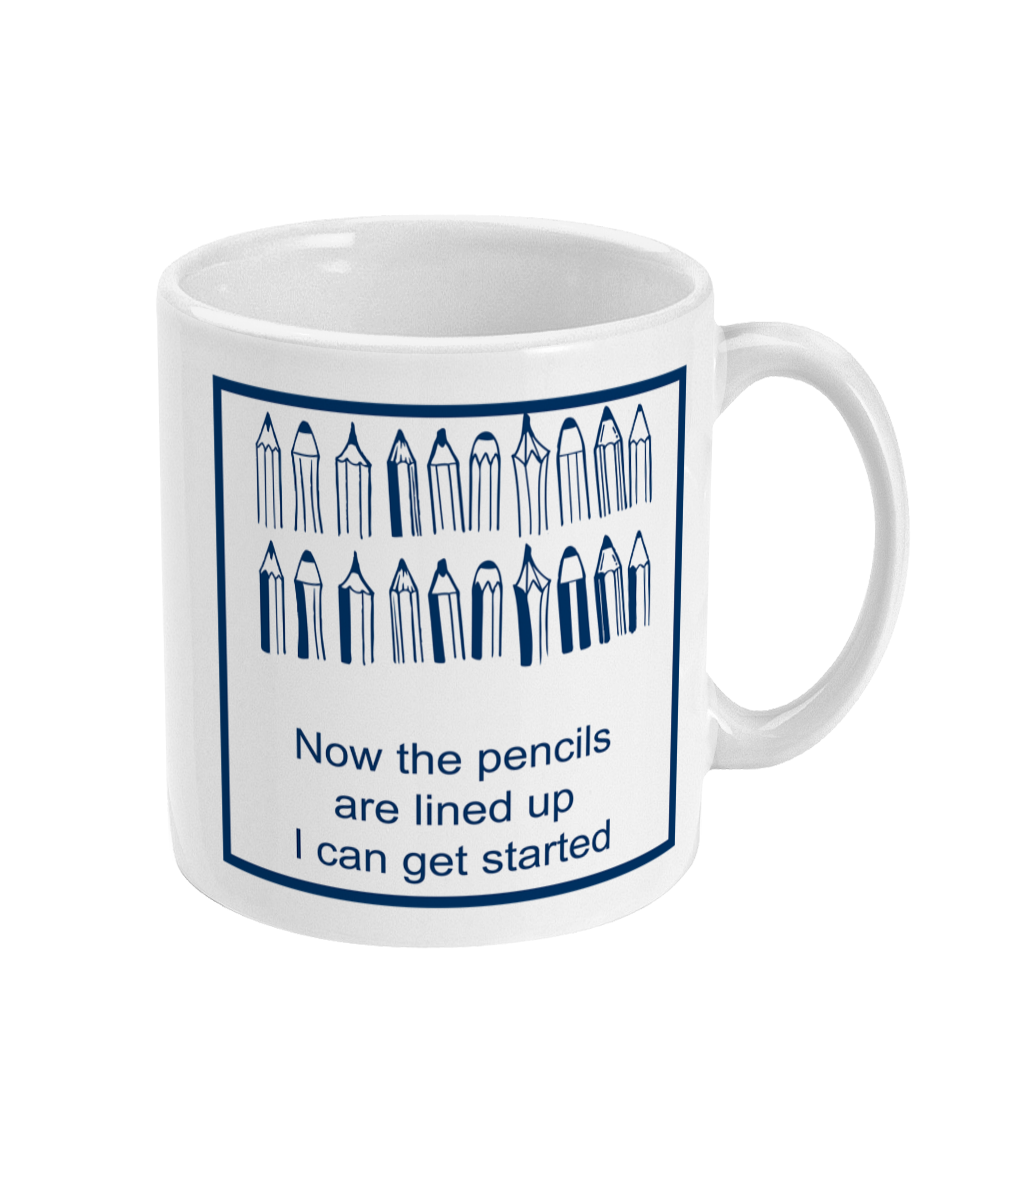 mug with image of pencils in a row  with the words now the pencils are lined up I can get started